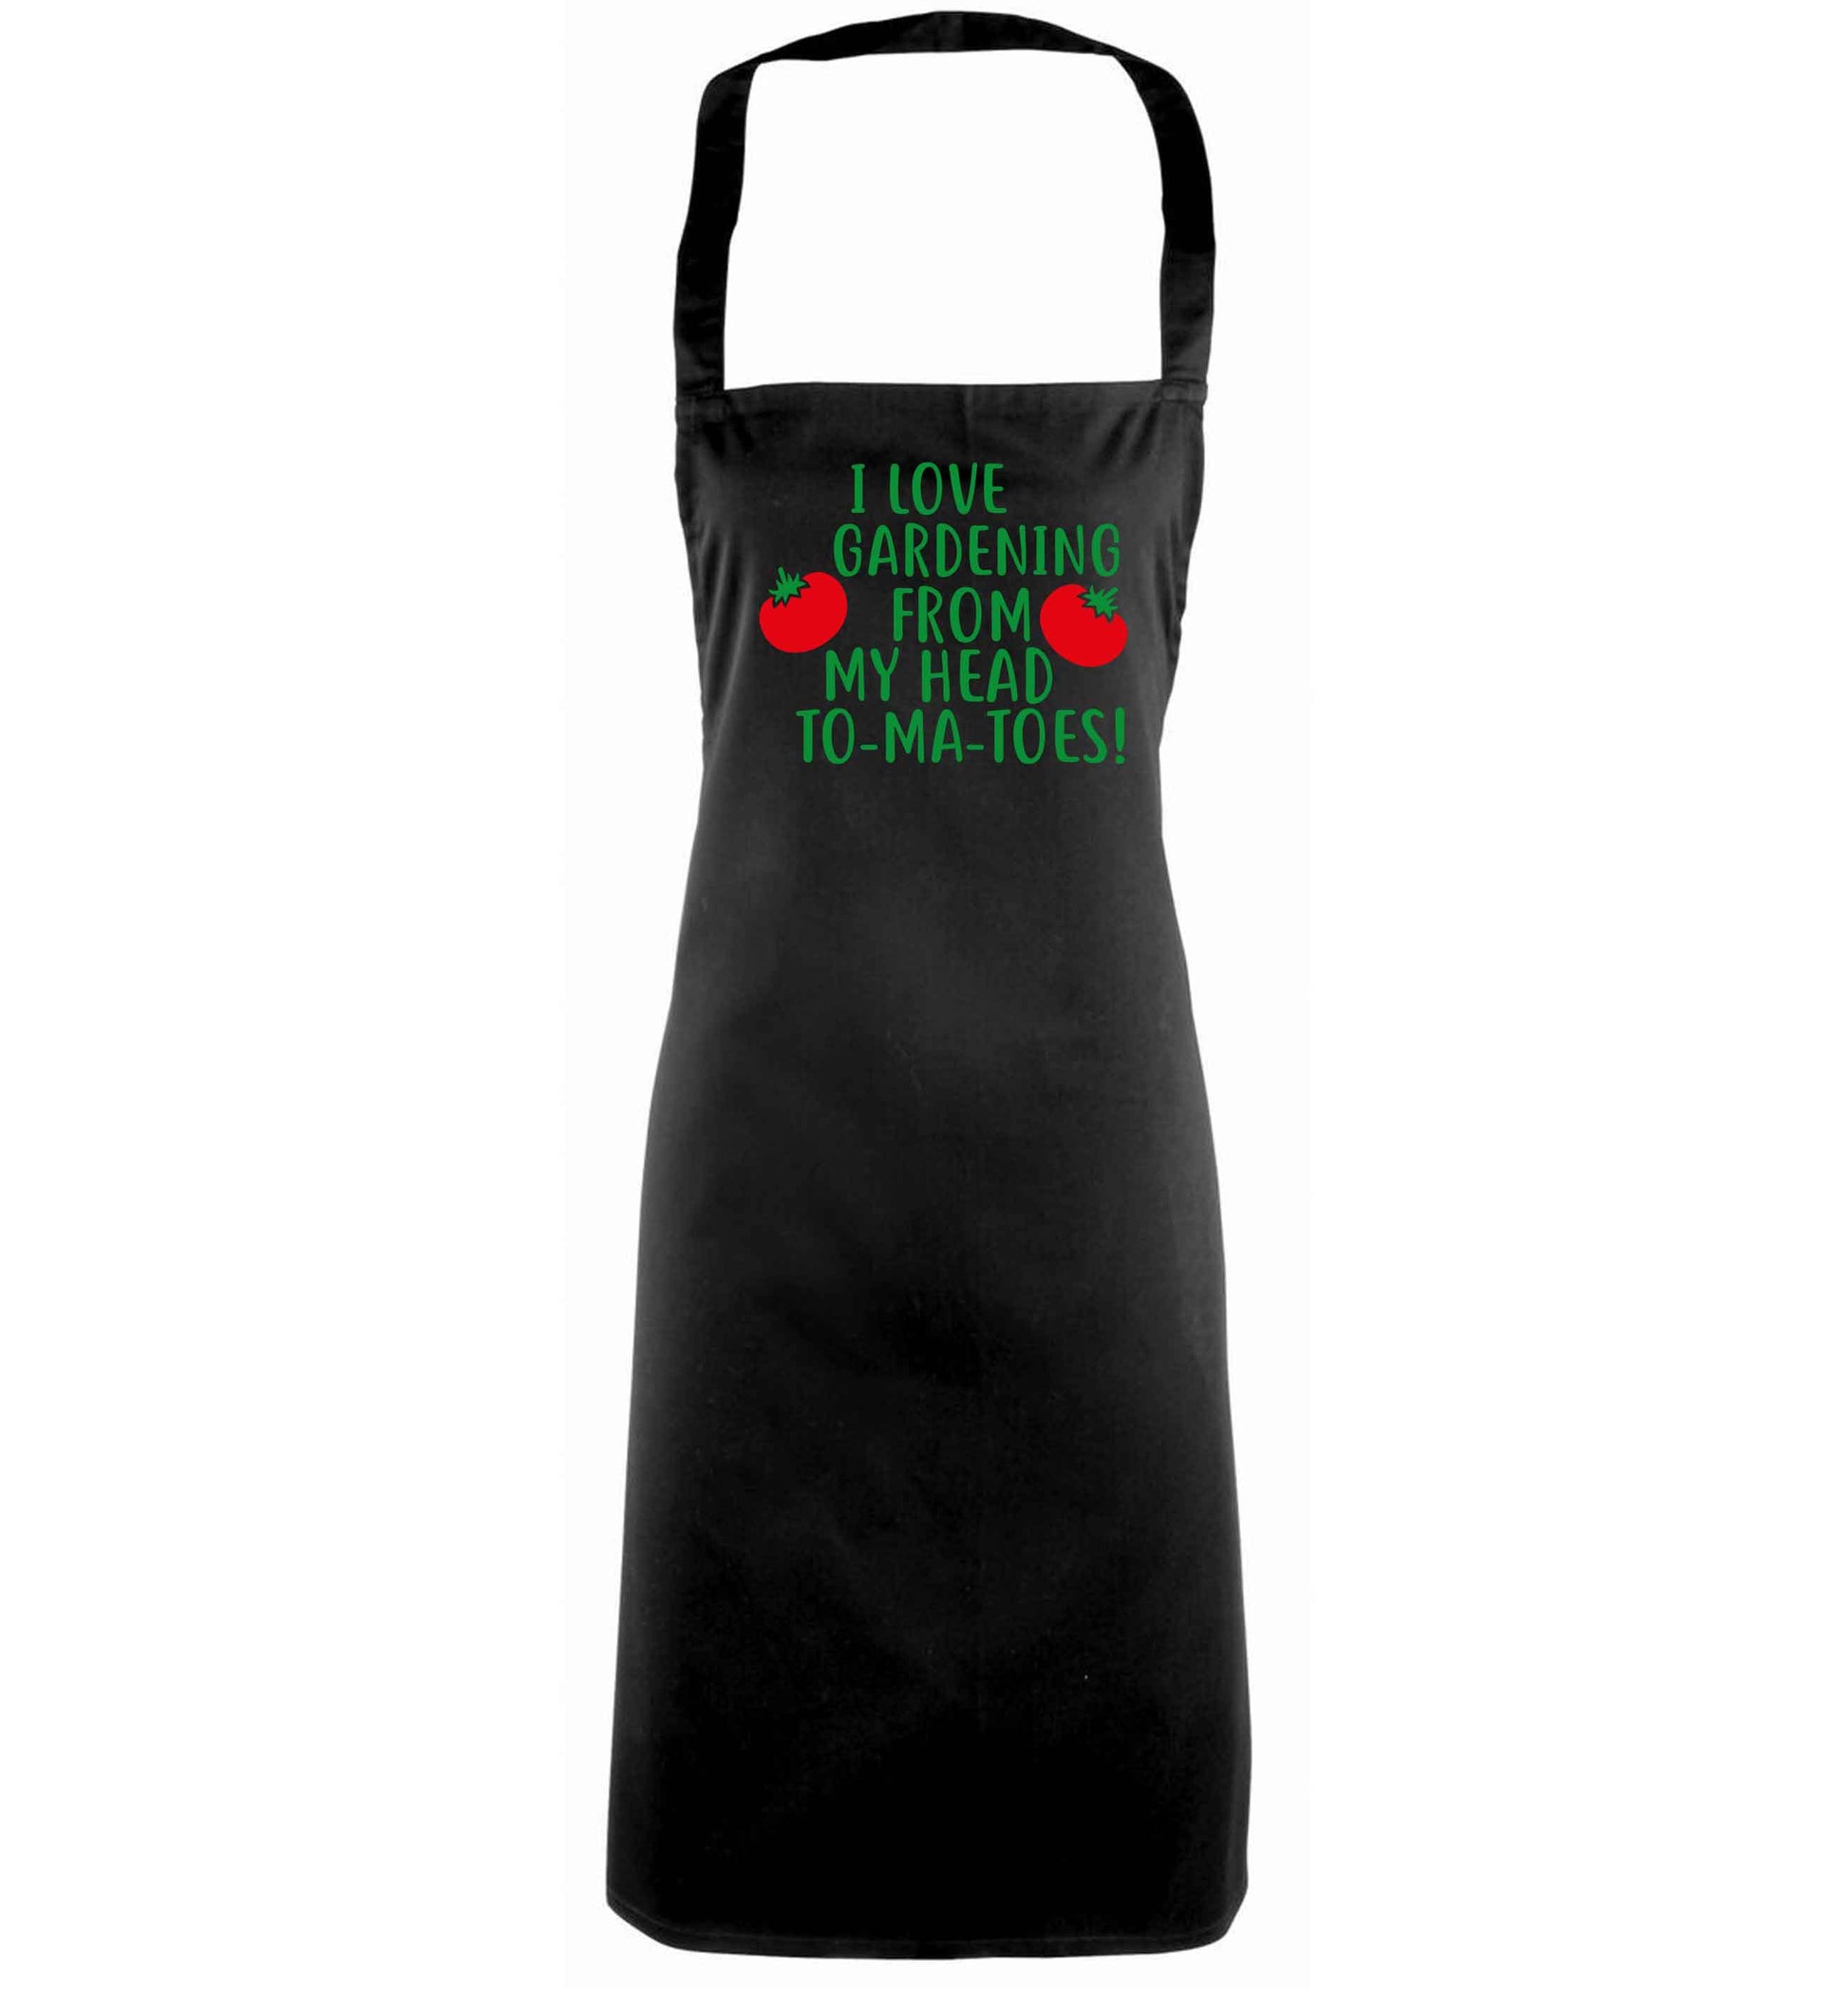 I love gardening from my head to-ma-toes black apron